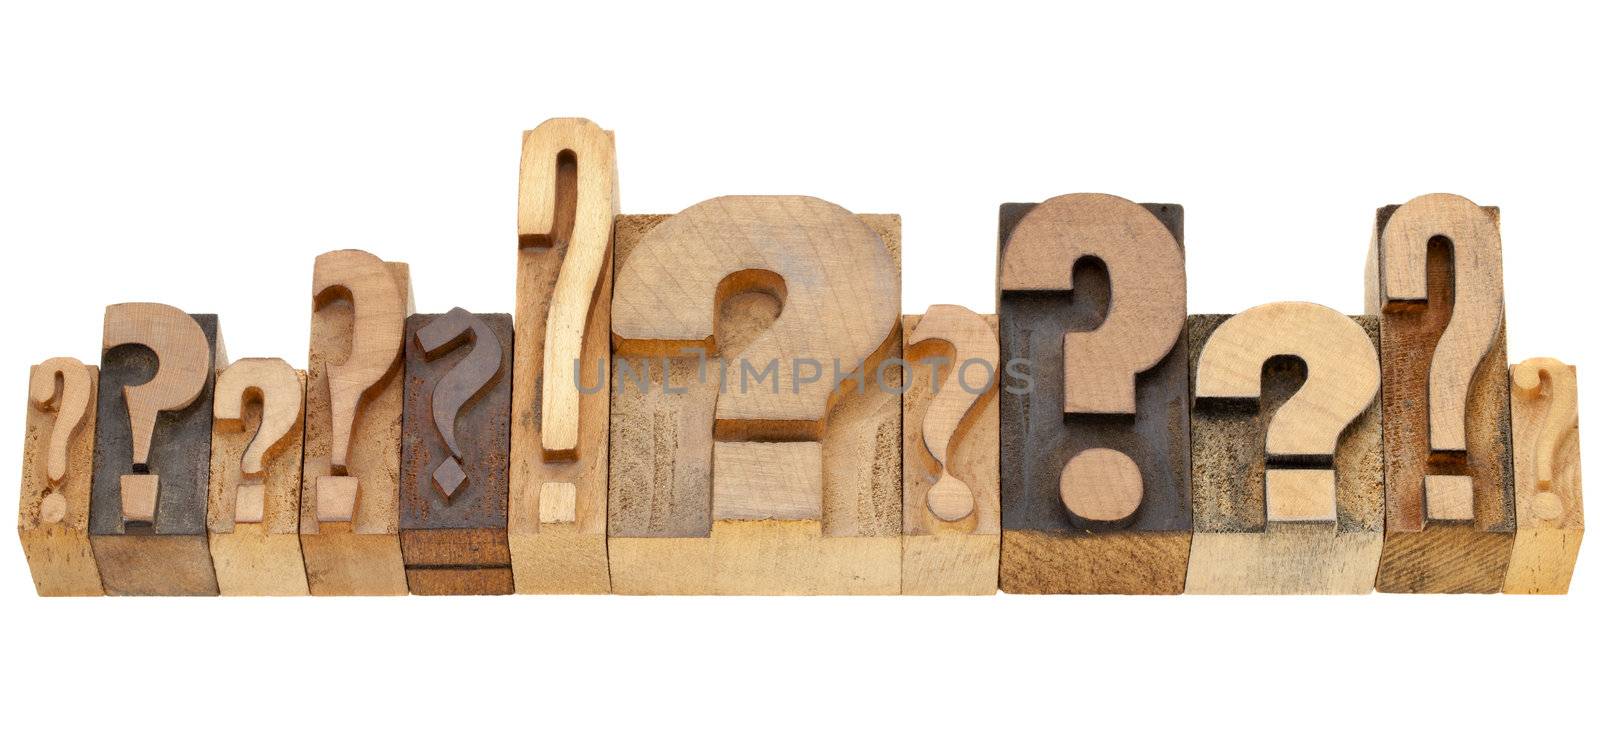 decision making concept - a row of question marks - vintage wood letterpress printing blocks